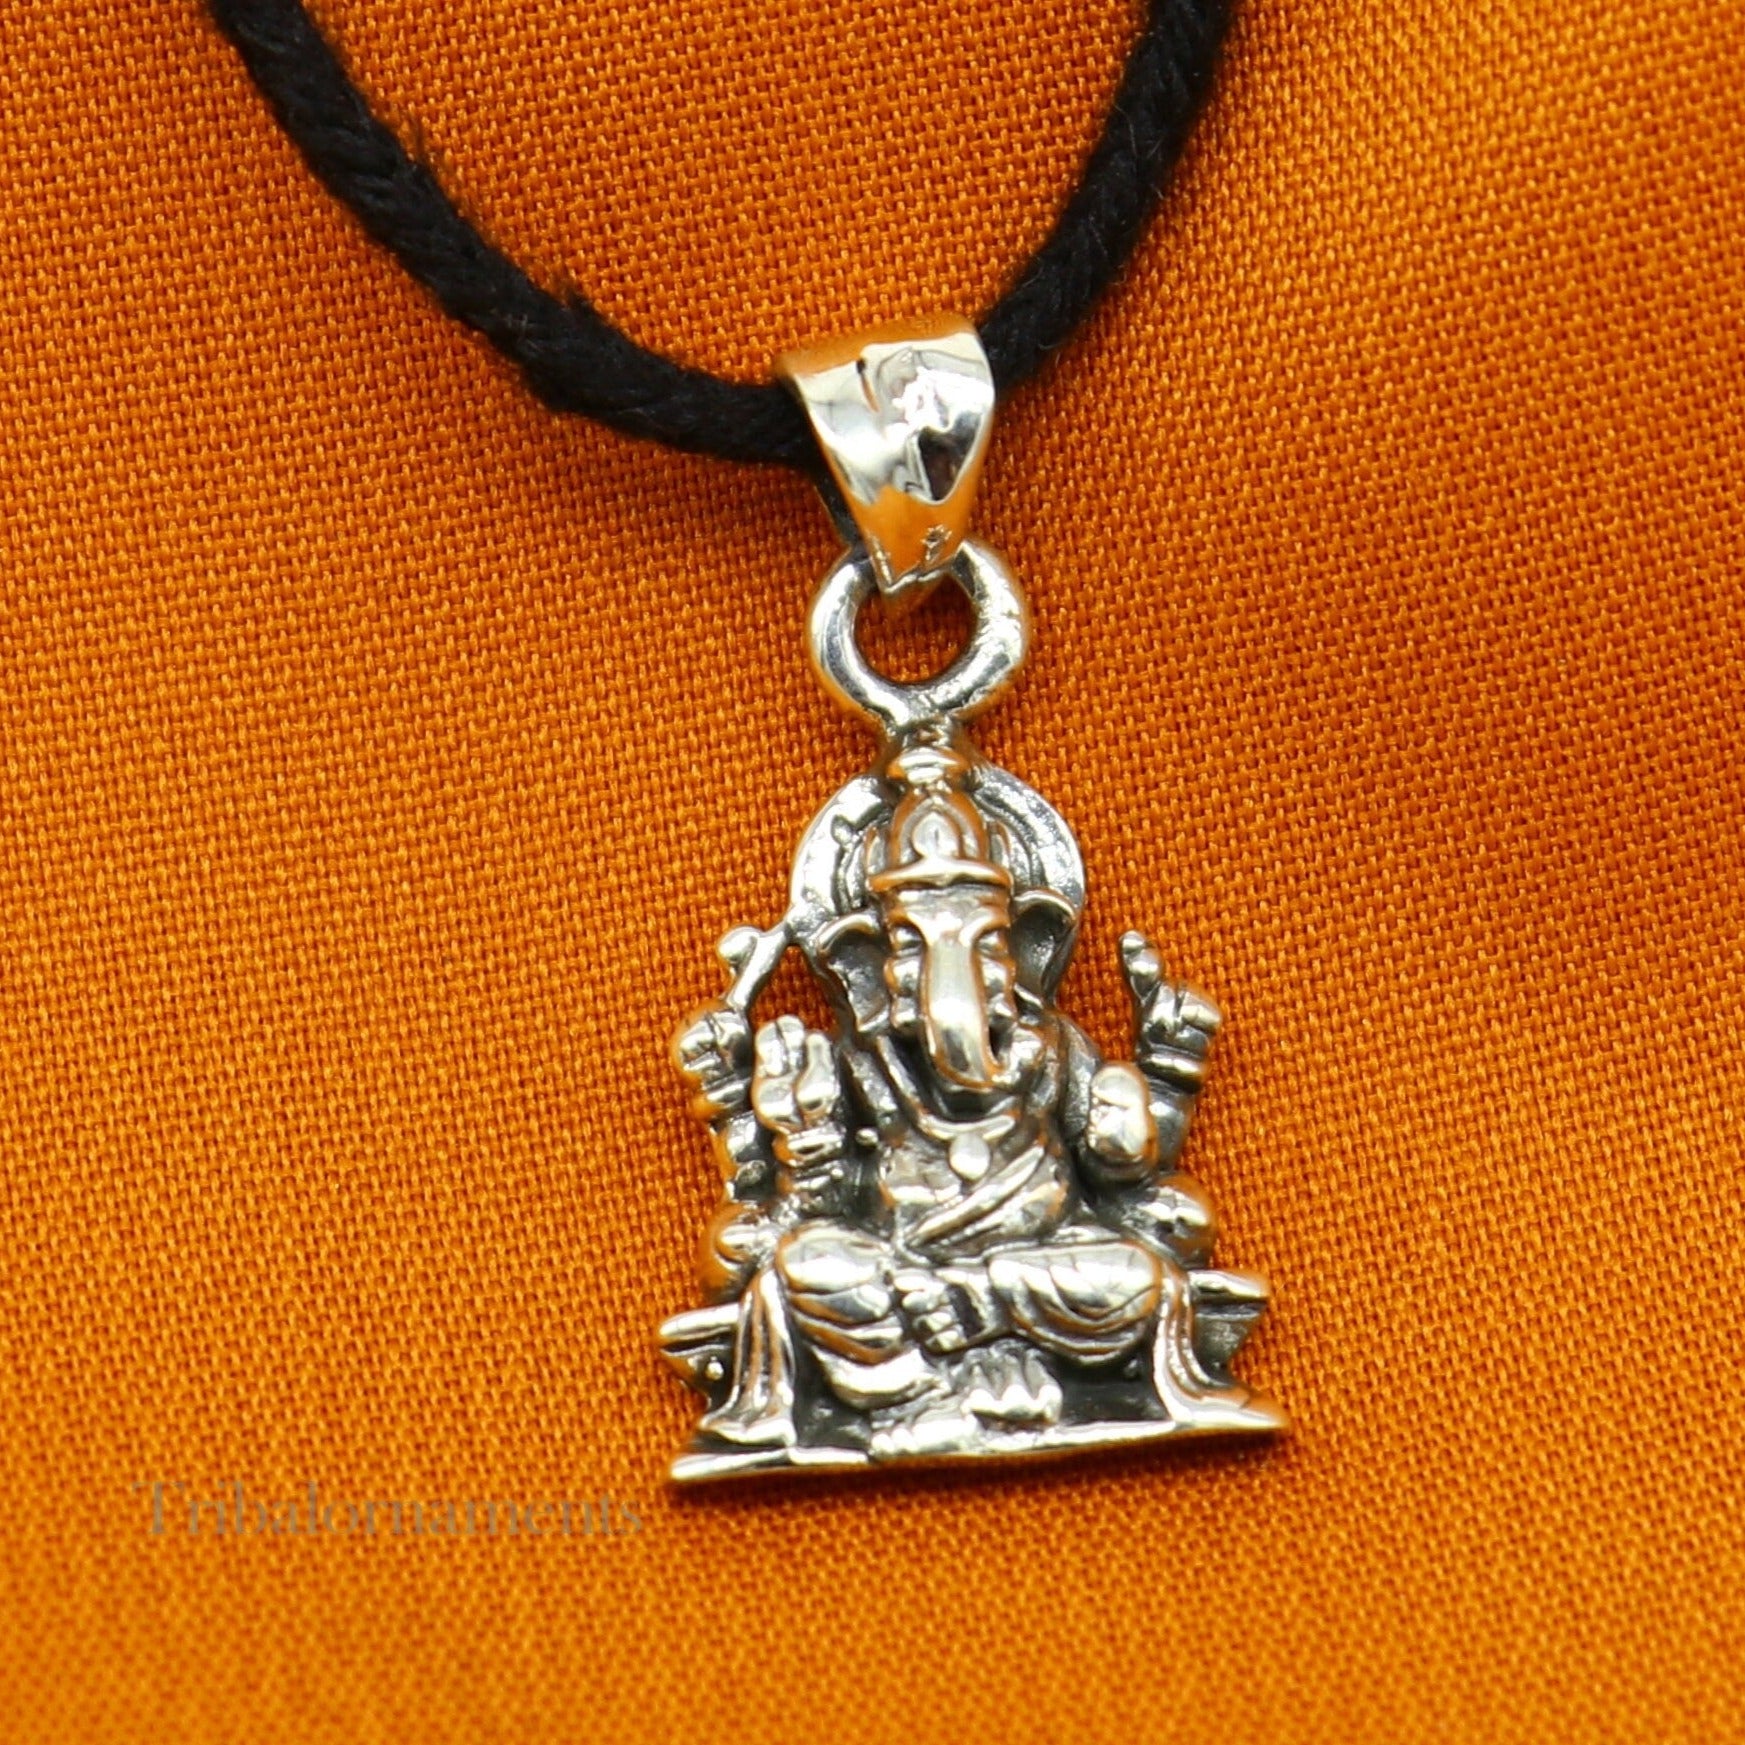 Divine lord Ganesha blessing pendant, excellent vintage designer 925 sterling silver handmade jewelry from india ssp968 - TRIBAL ORNAMENTS